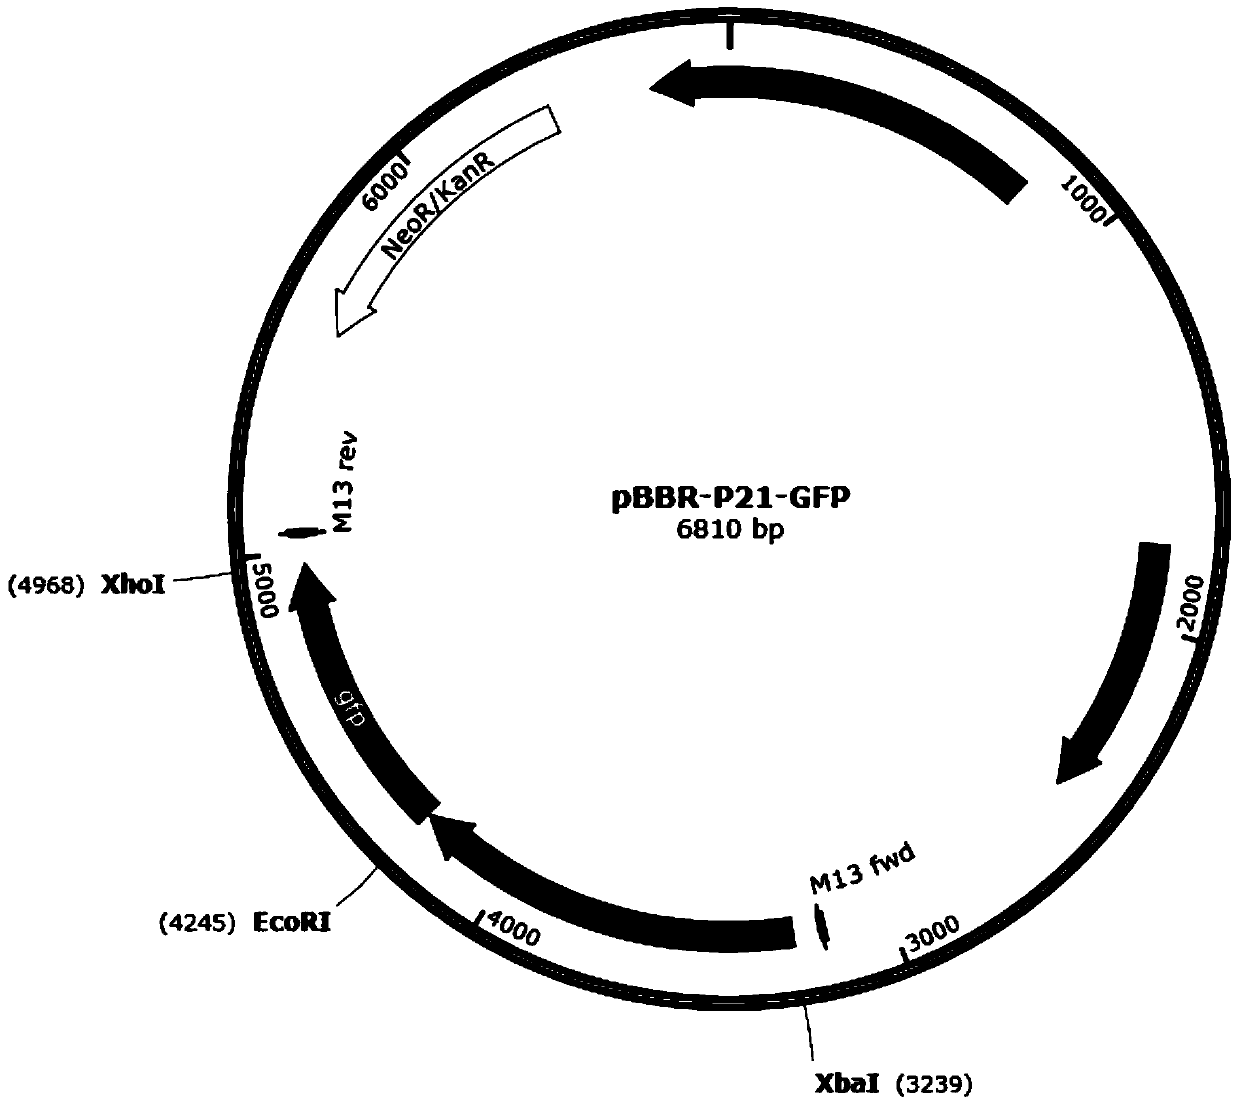 Strong promoter and plasmid vector containing strong promoter and application of strong promoter and plasmid vector